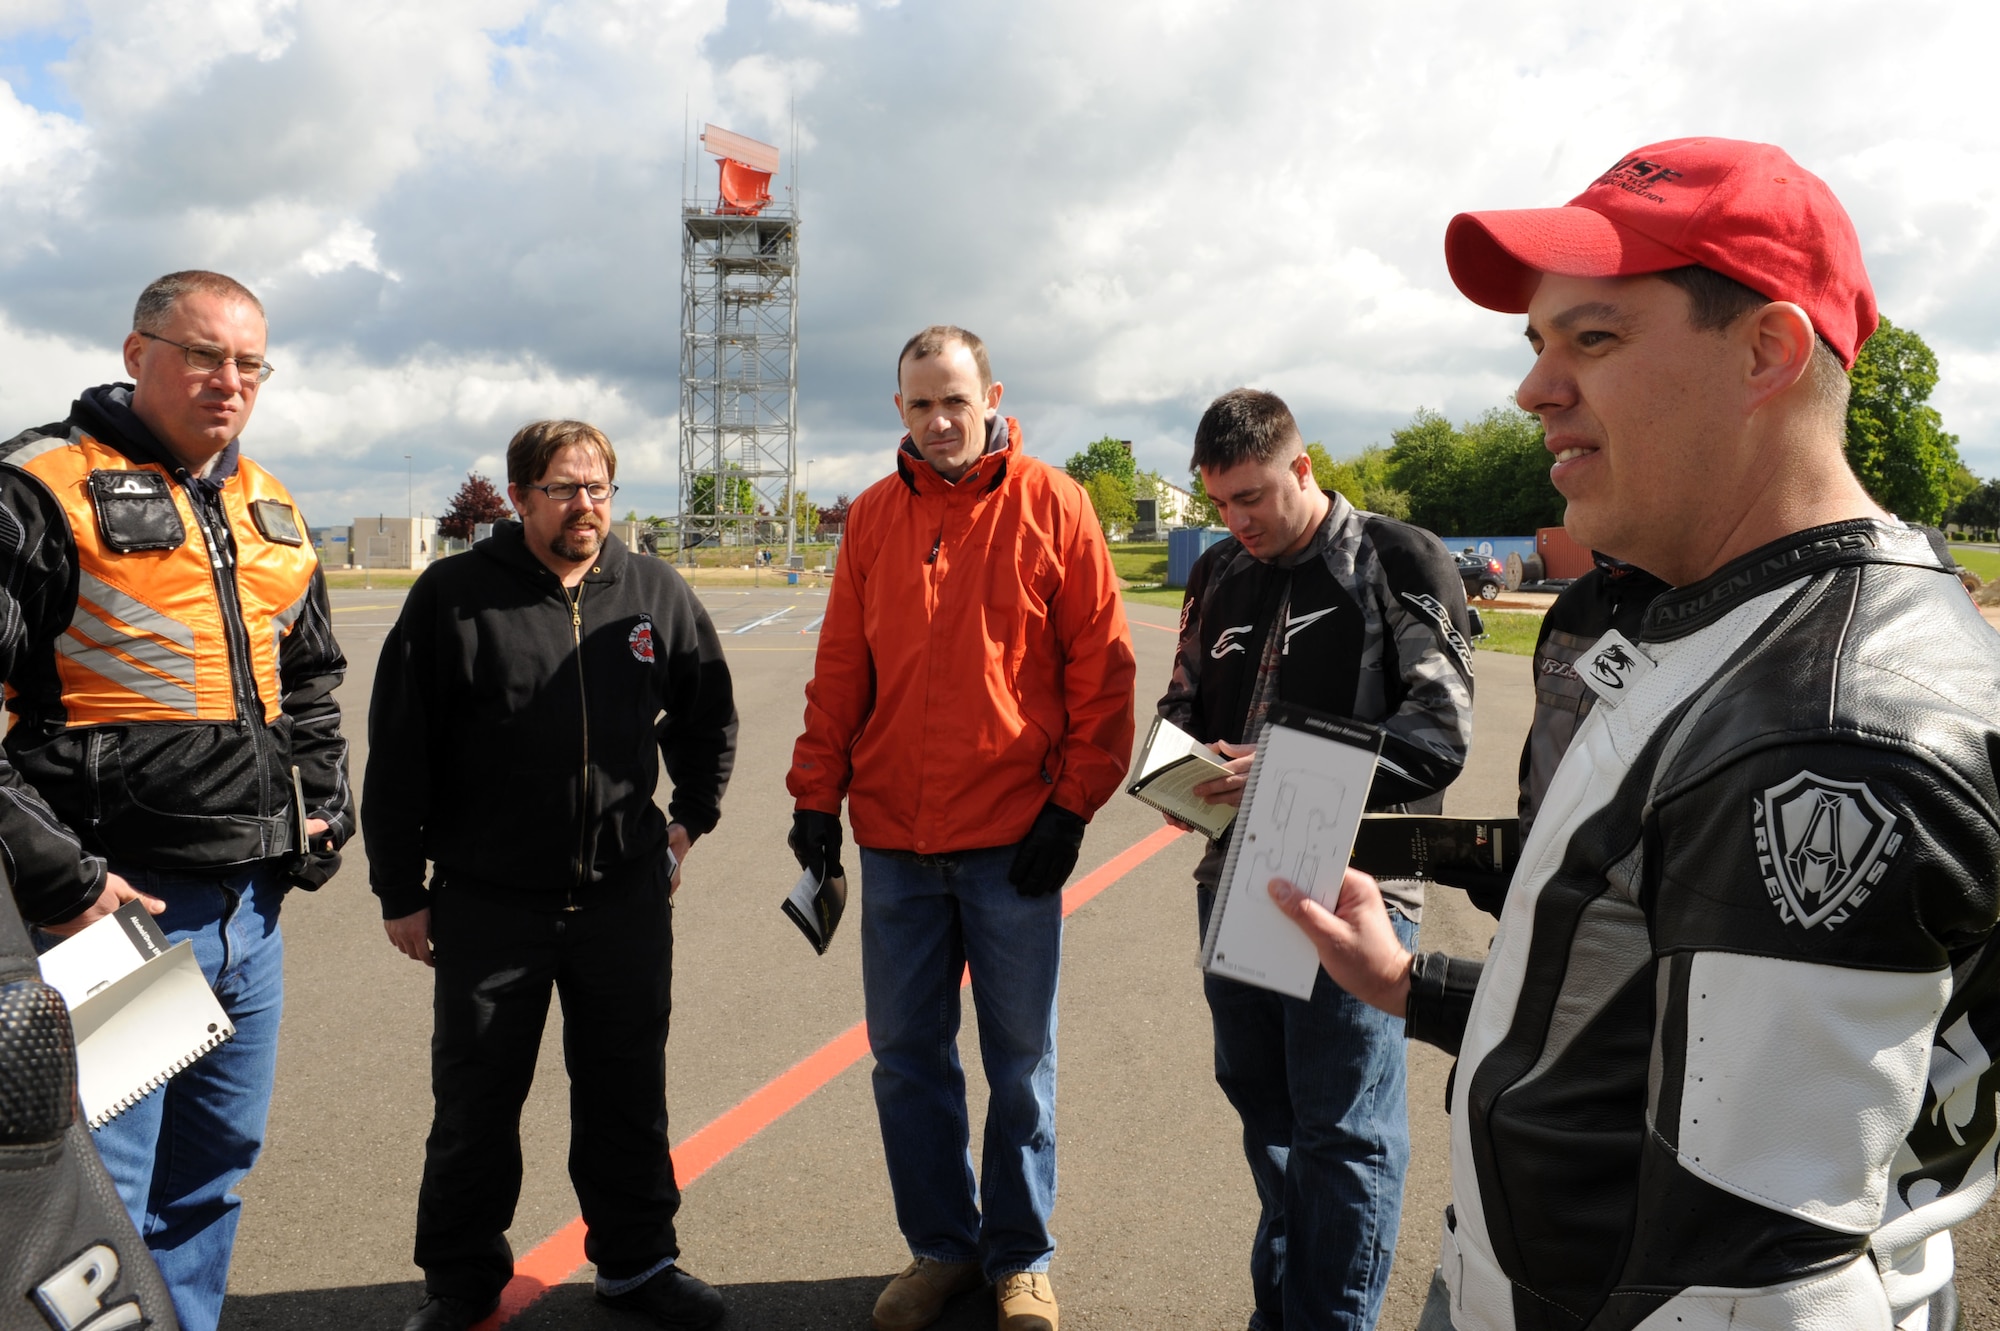 SPANGDAHLEM AIR BASE, Germany – Right, Master Sgt. Douglas Cook, 52nd Fighter Wing Safety office and motorcycle instructor, discusses safety material during the motorcycle safety class at the Saber driving course here May 15. The class is geared to improve riders’ skill by performing different maneuvers on the course as well as discussing and reviewing a variety of safety information. The safety office conducts the motorcycle safety course three times monthly. U.S Air Forces in Europe regulations mandate that every motorcyclist on base must take or retake this class once every three years to keep their skillset current.  (U.S. Air Force photo by Senior Airman Christopher Toon/Released)